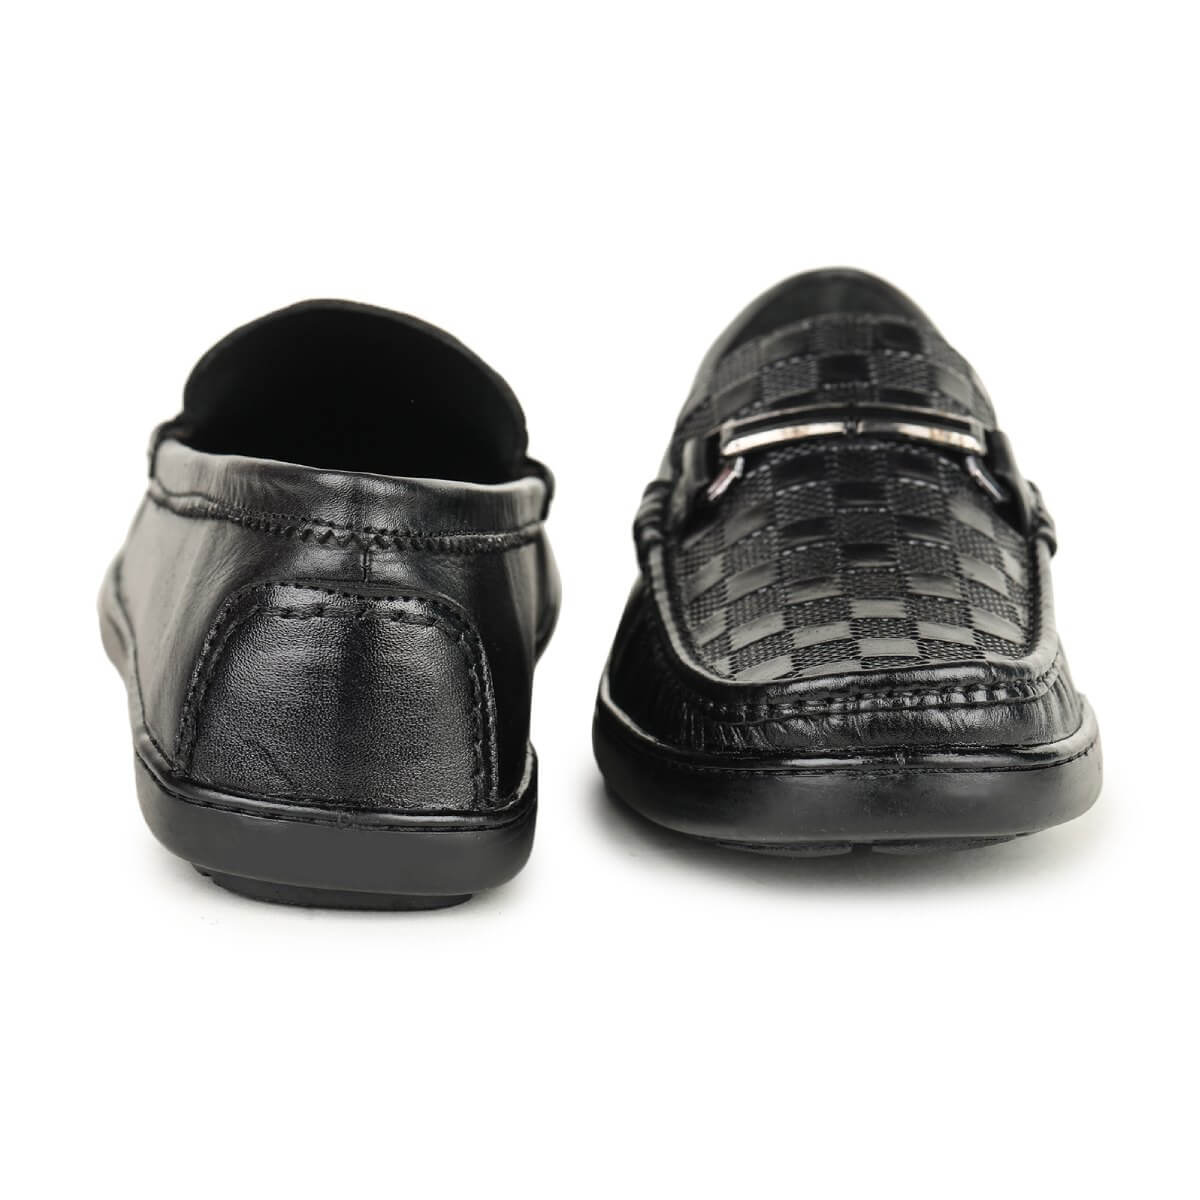 checkbox pattern loafers for men_2